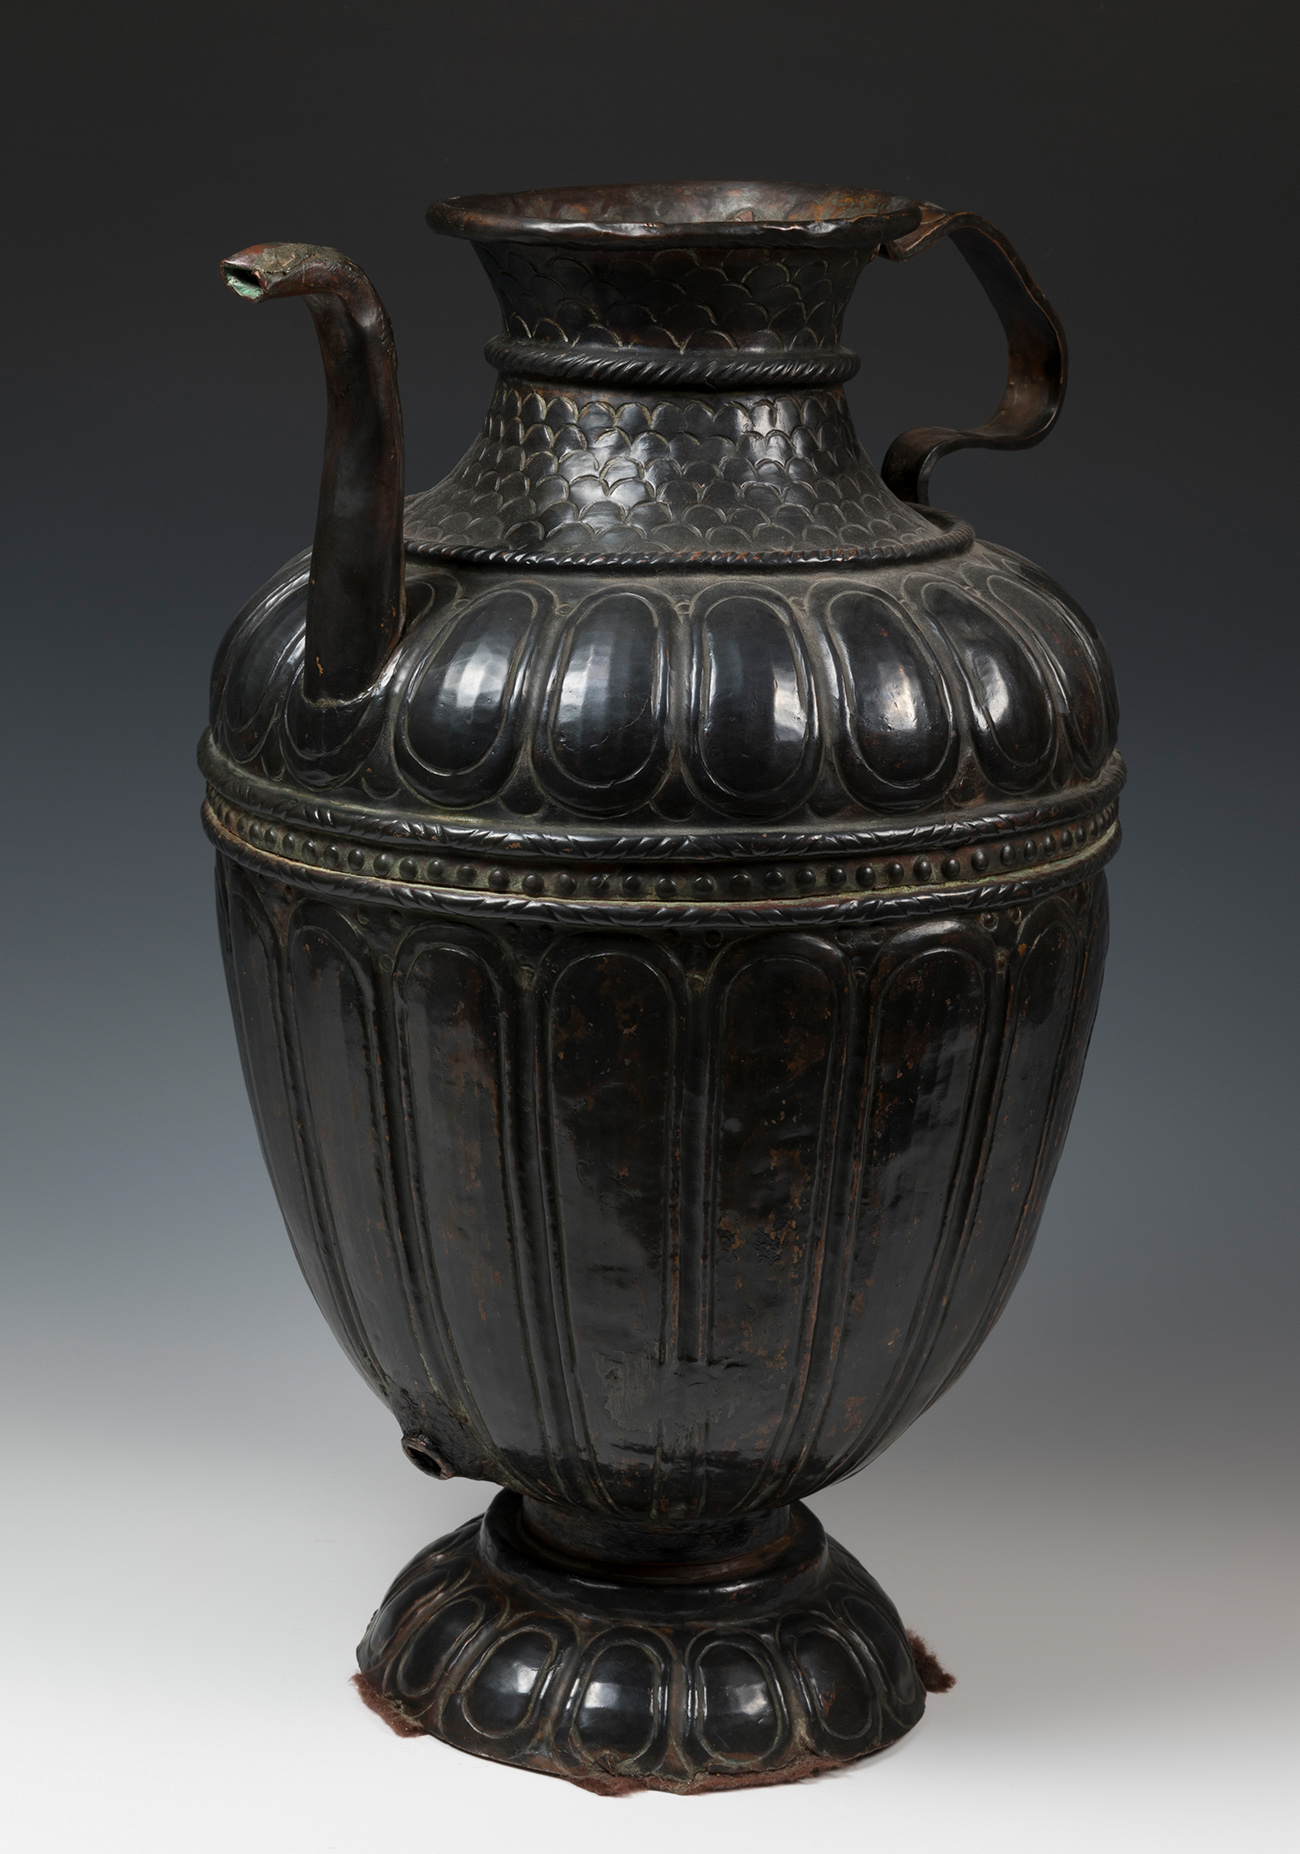 Jug; Italy, 16th-17th century.Patinated copper.With faults.Measurements: 39 x 29 x 23 cm.Jug made of - Image 4 of 7